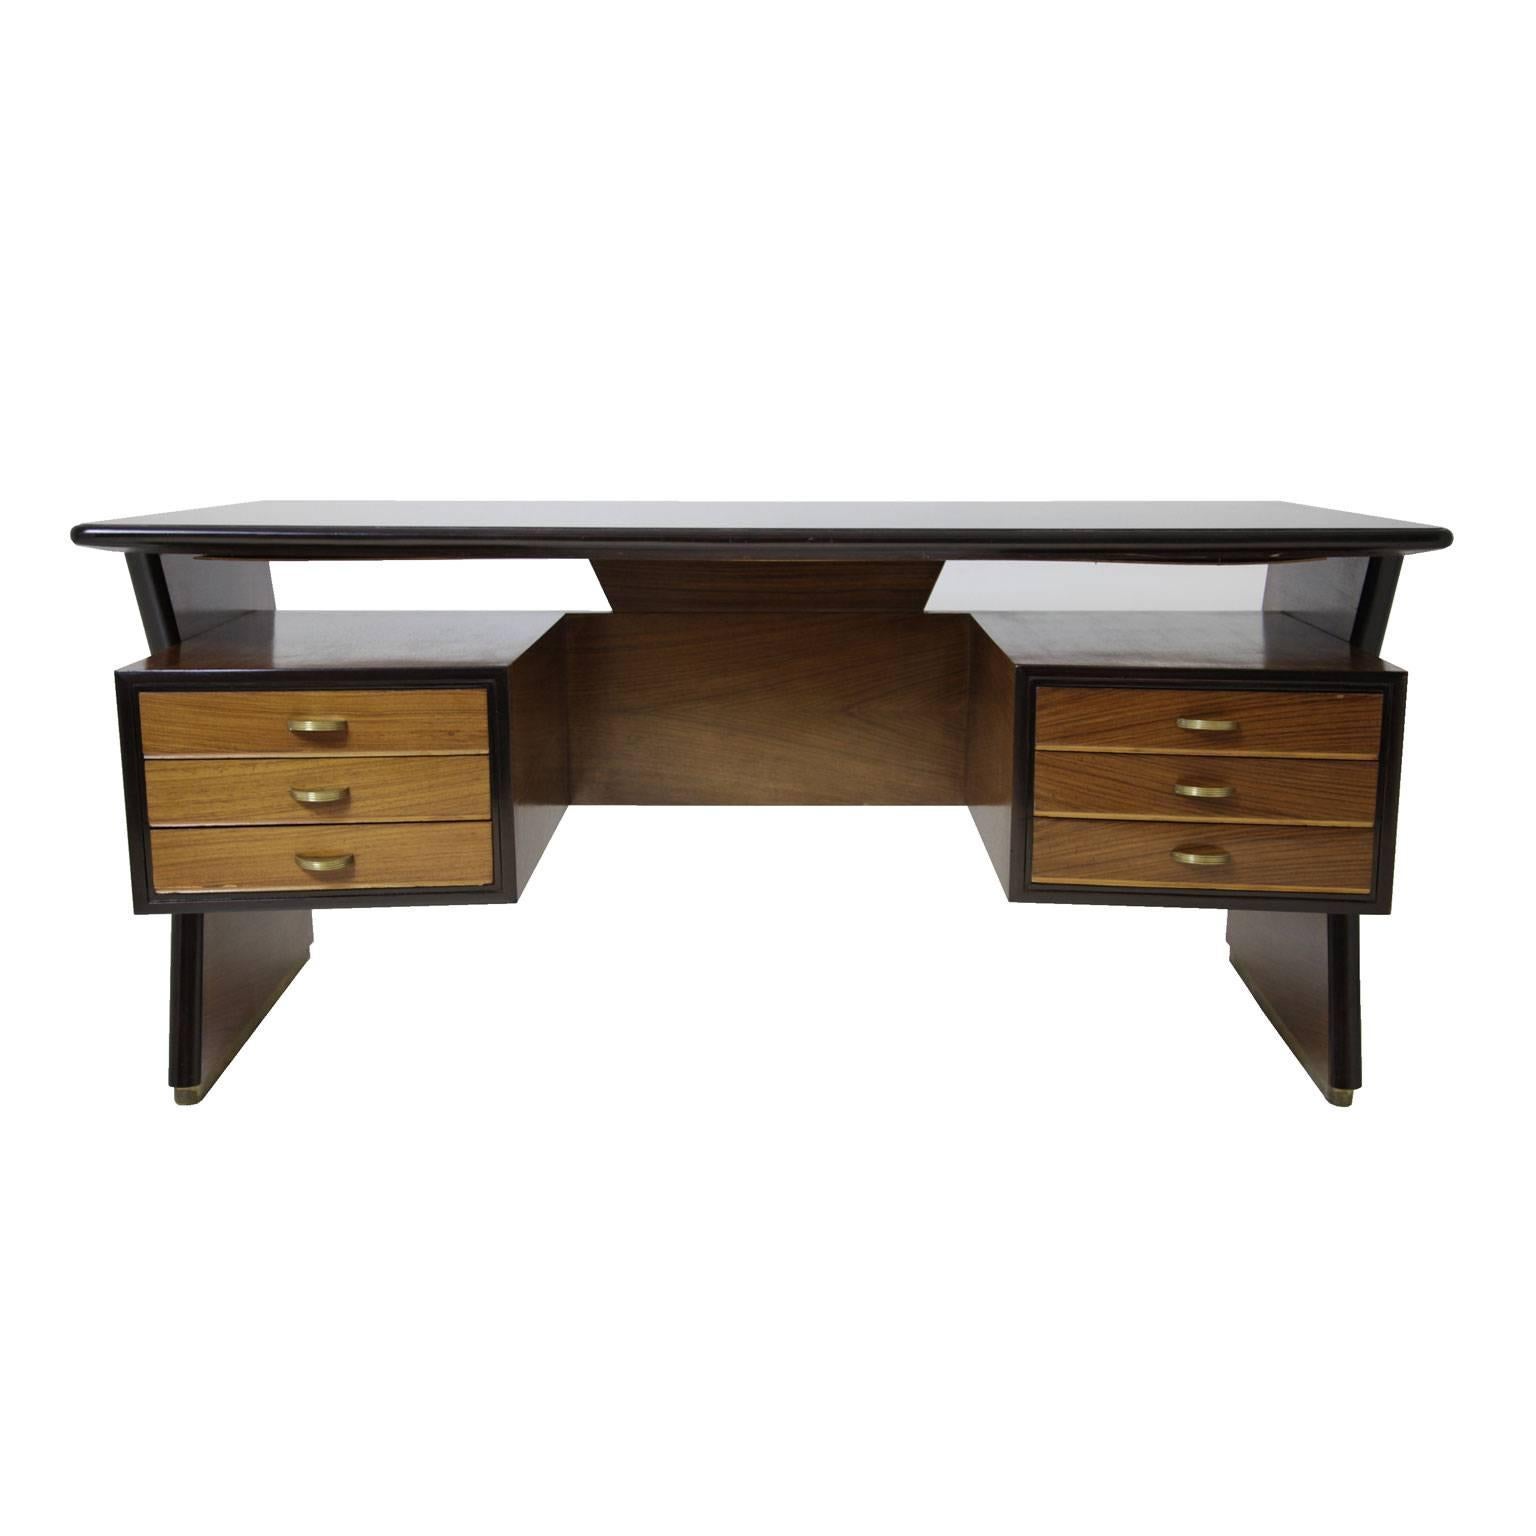 Wonderful Italian Designer Desk, dating from the 1940s. With black glass top and six drawers.